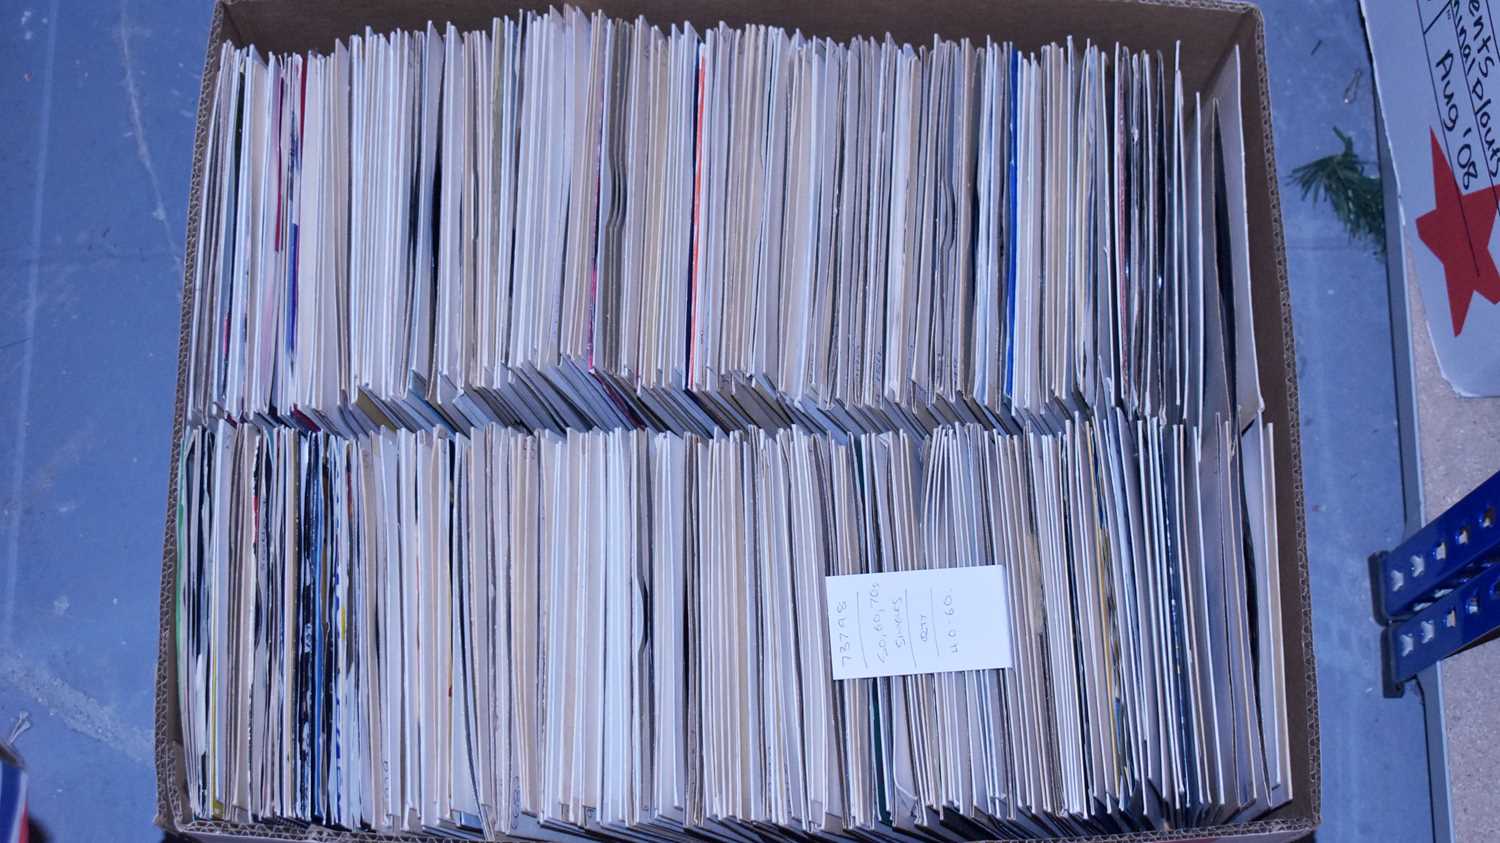 Lot 154 - A collection of 7" singles from the 50s, 60s, and 70s